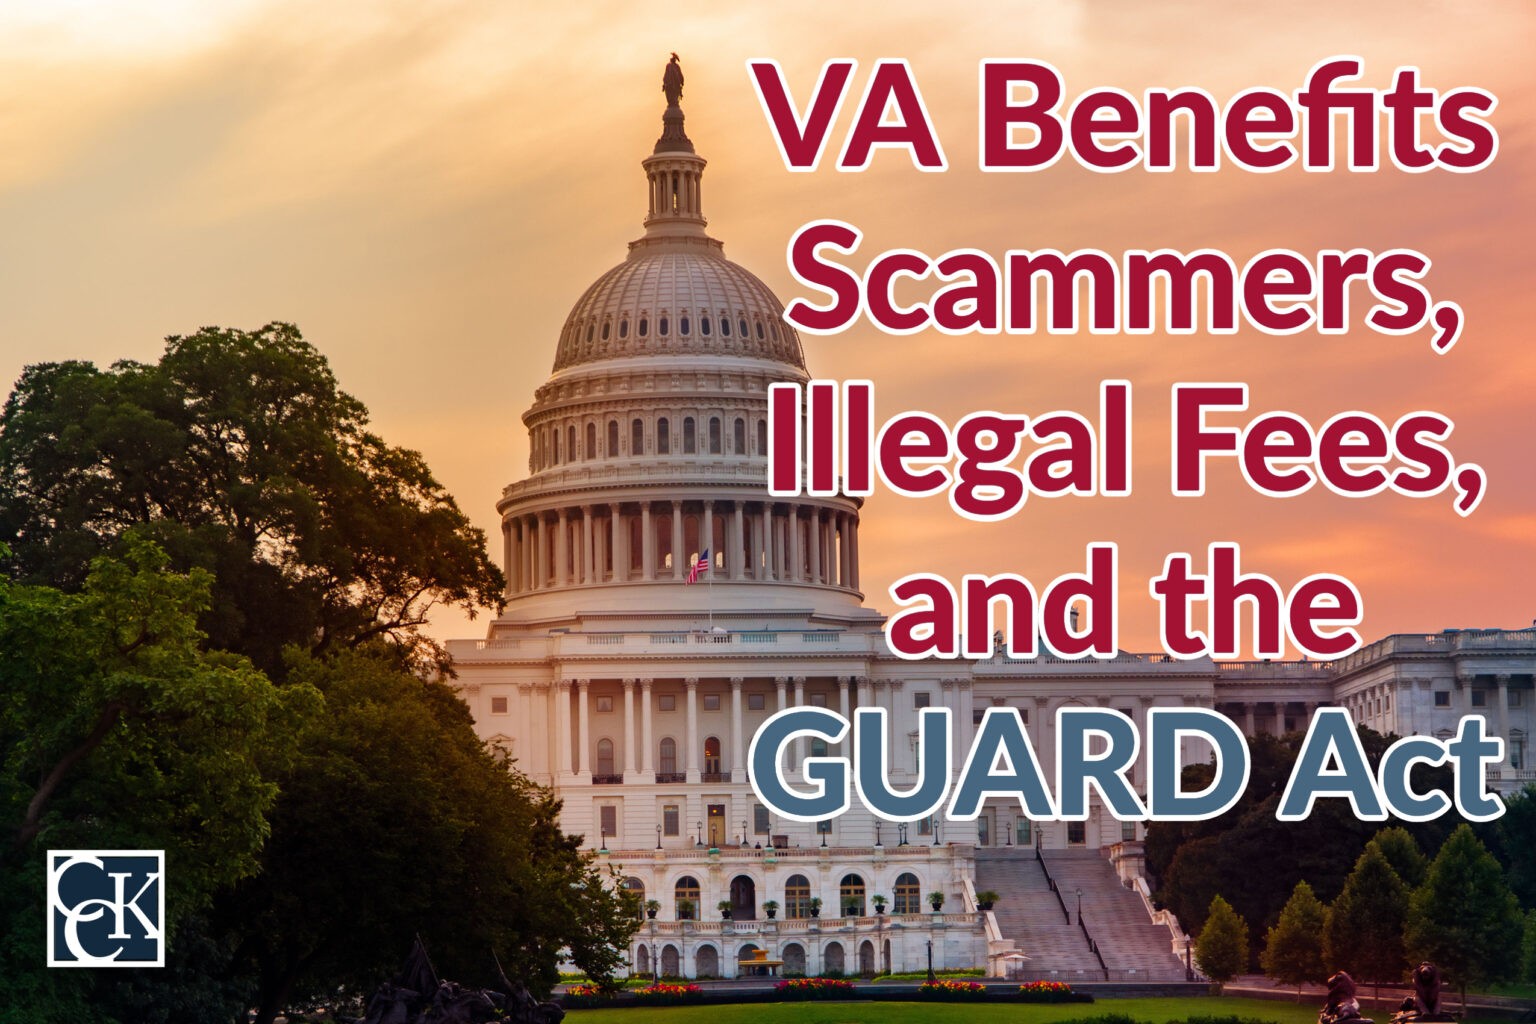 VA Benefits Scammers, Illegal Fees, and the Guard Act CCK Law